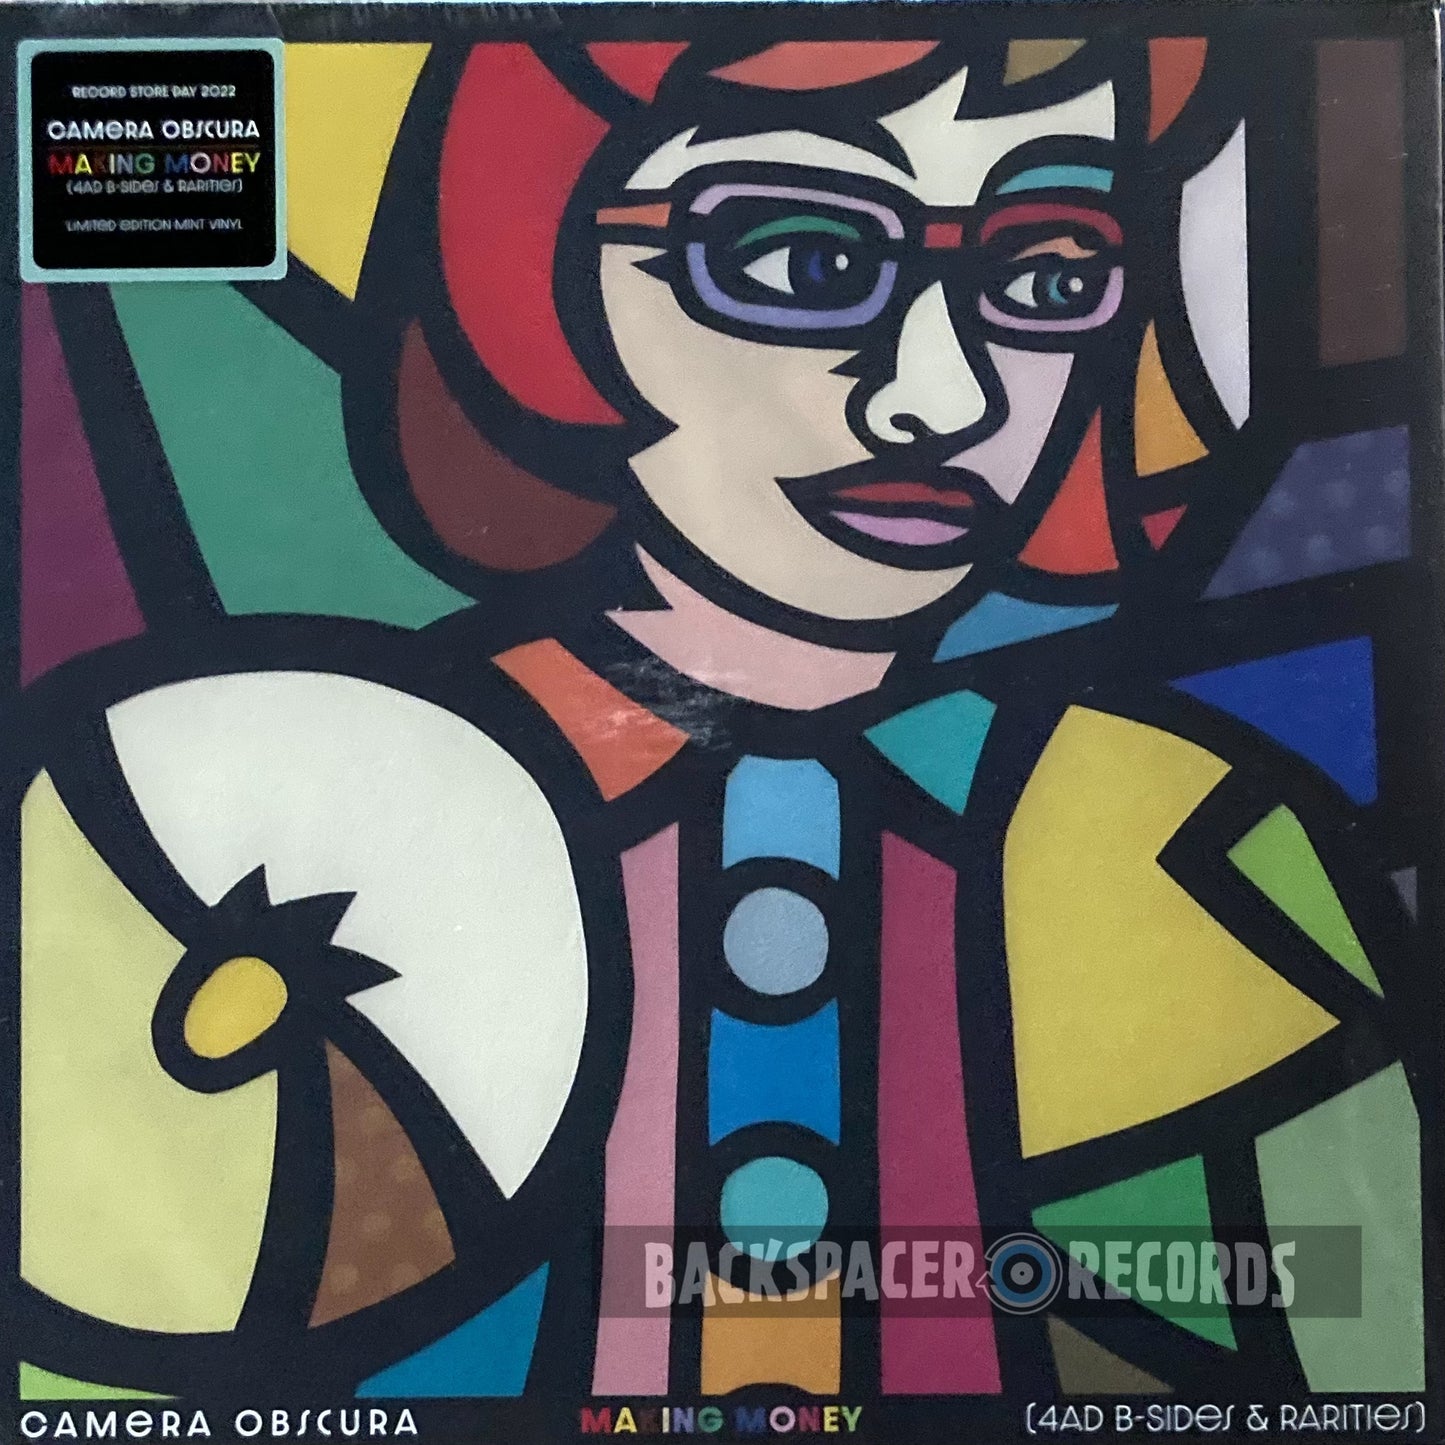 Camera Obscura – Making Money: 4AD B-Sides & Rarities (Limited Edition) LP (Sealed)